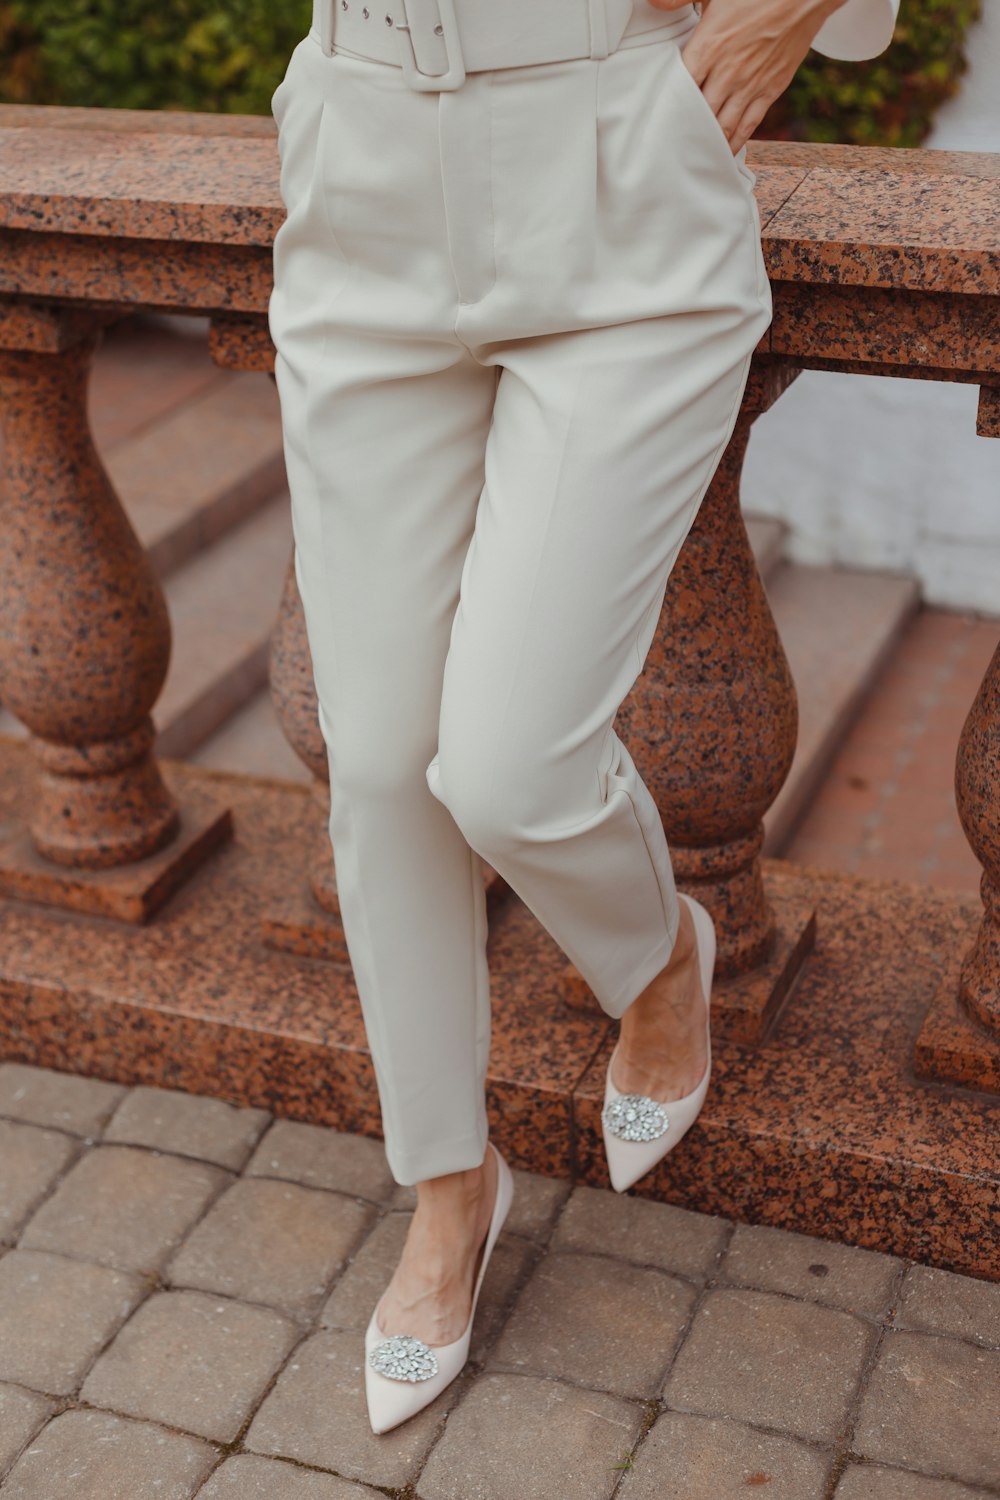 a woman wearing a white suit and heels